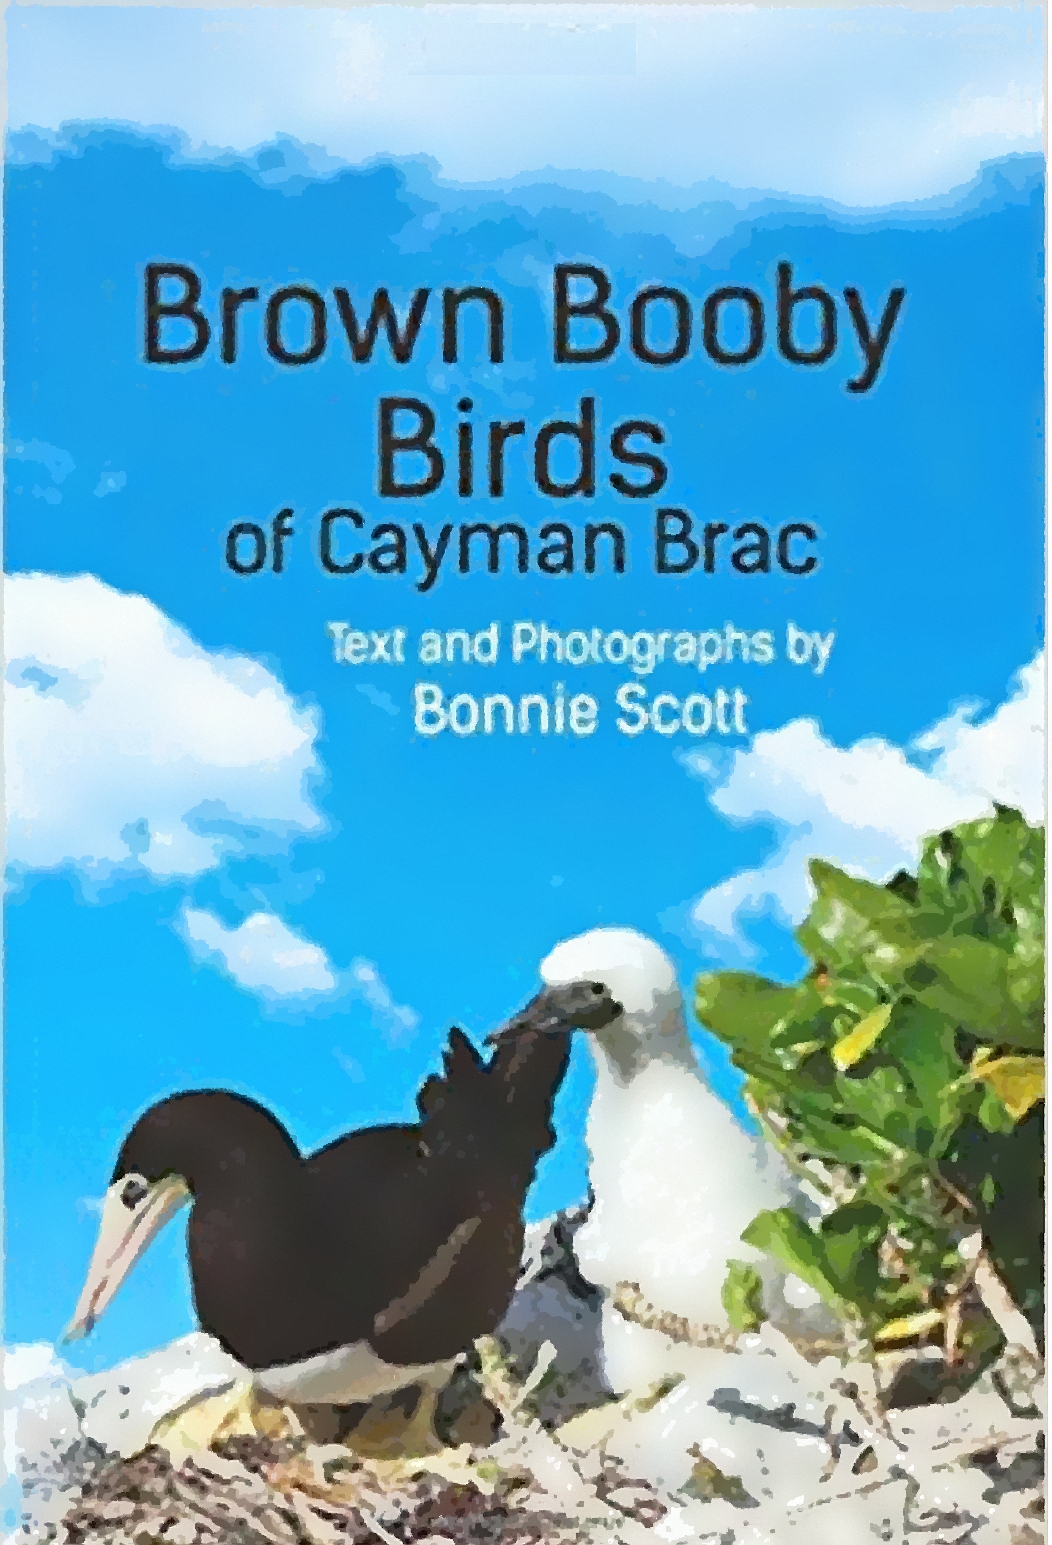 a book cover with blue sky and white clouds, with Brown Booby birds on the beach next to a bush